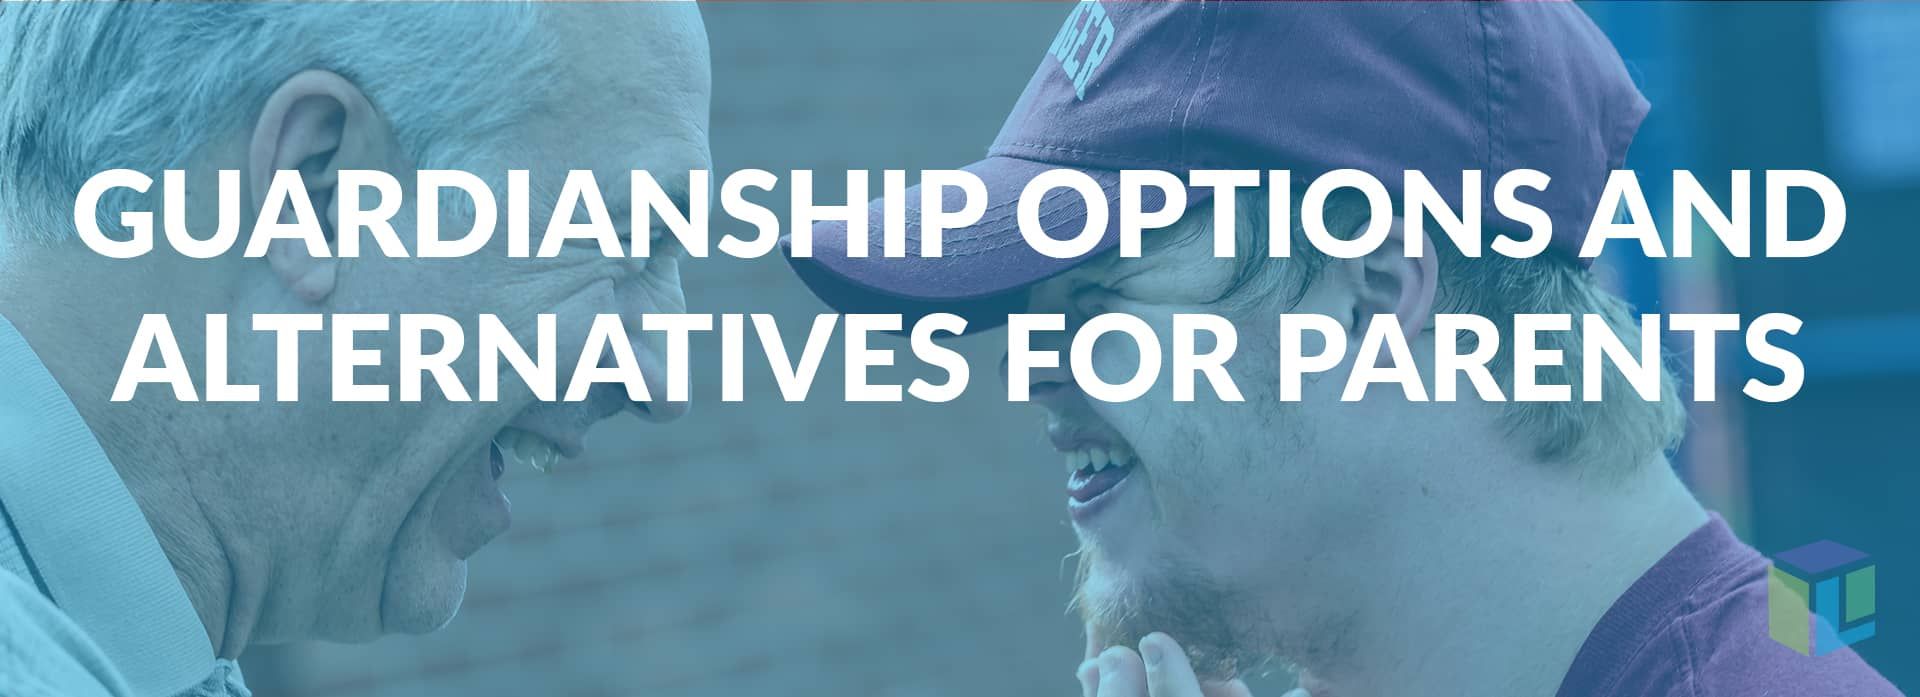 Guardianship Options And Alternatives For Parents Guardianship Options And Alternatives For Parents Guardianship Options And Alternatives For Parents Guardianship Options And Alternatives For Parents